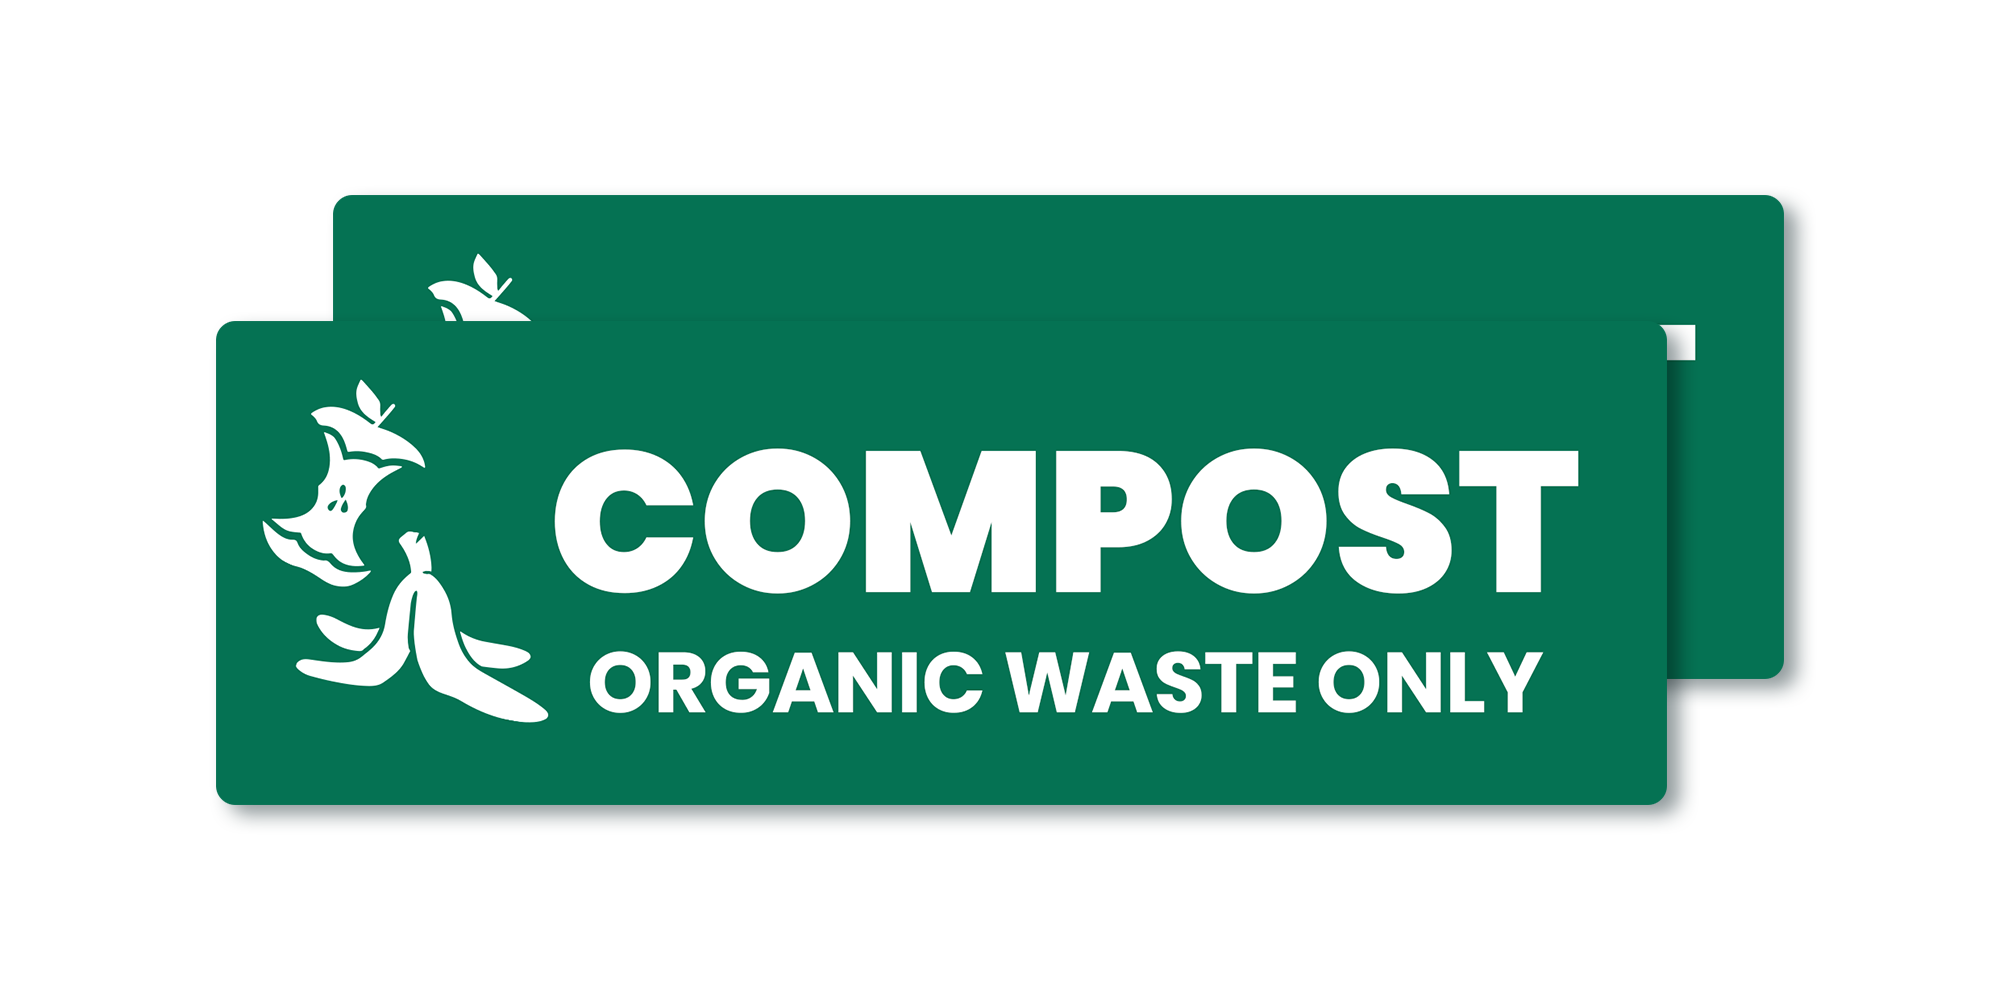 Trash Recycle Compost Sticker Set – Heavy-Duty Trash Bin Labels | 6" x 2" | Made In USA